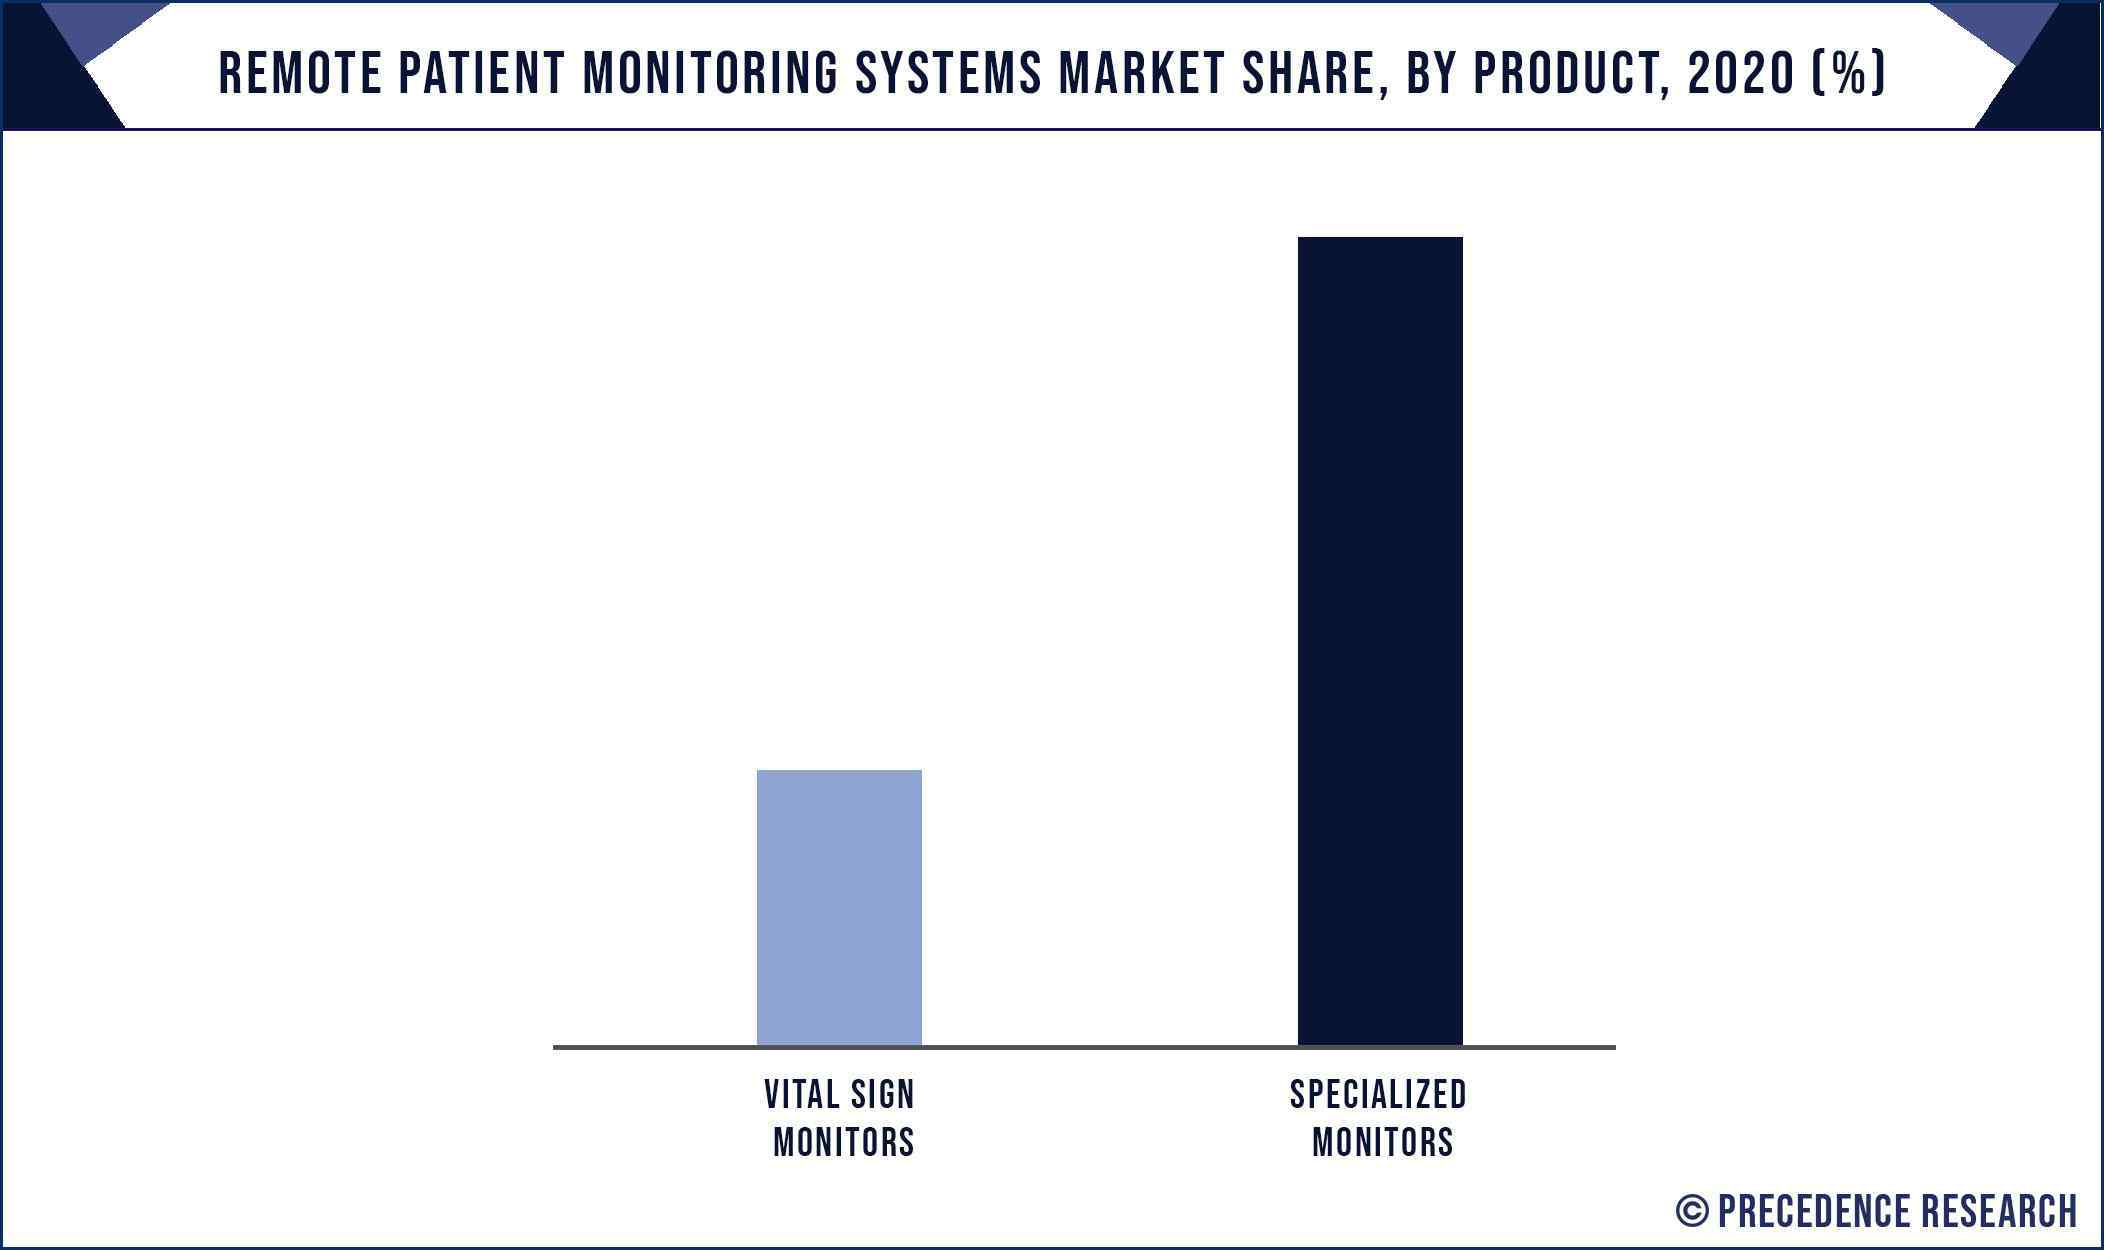 Remote Patient Monitoring Systems Market Share, By Product, 2020 (%)